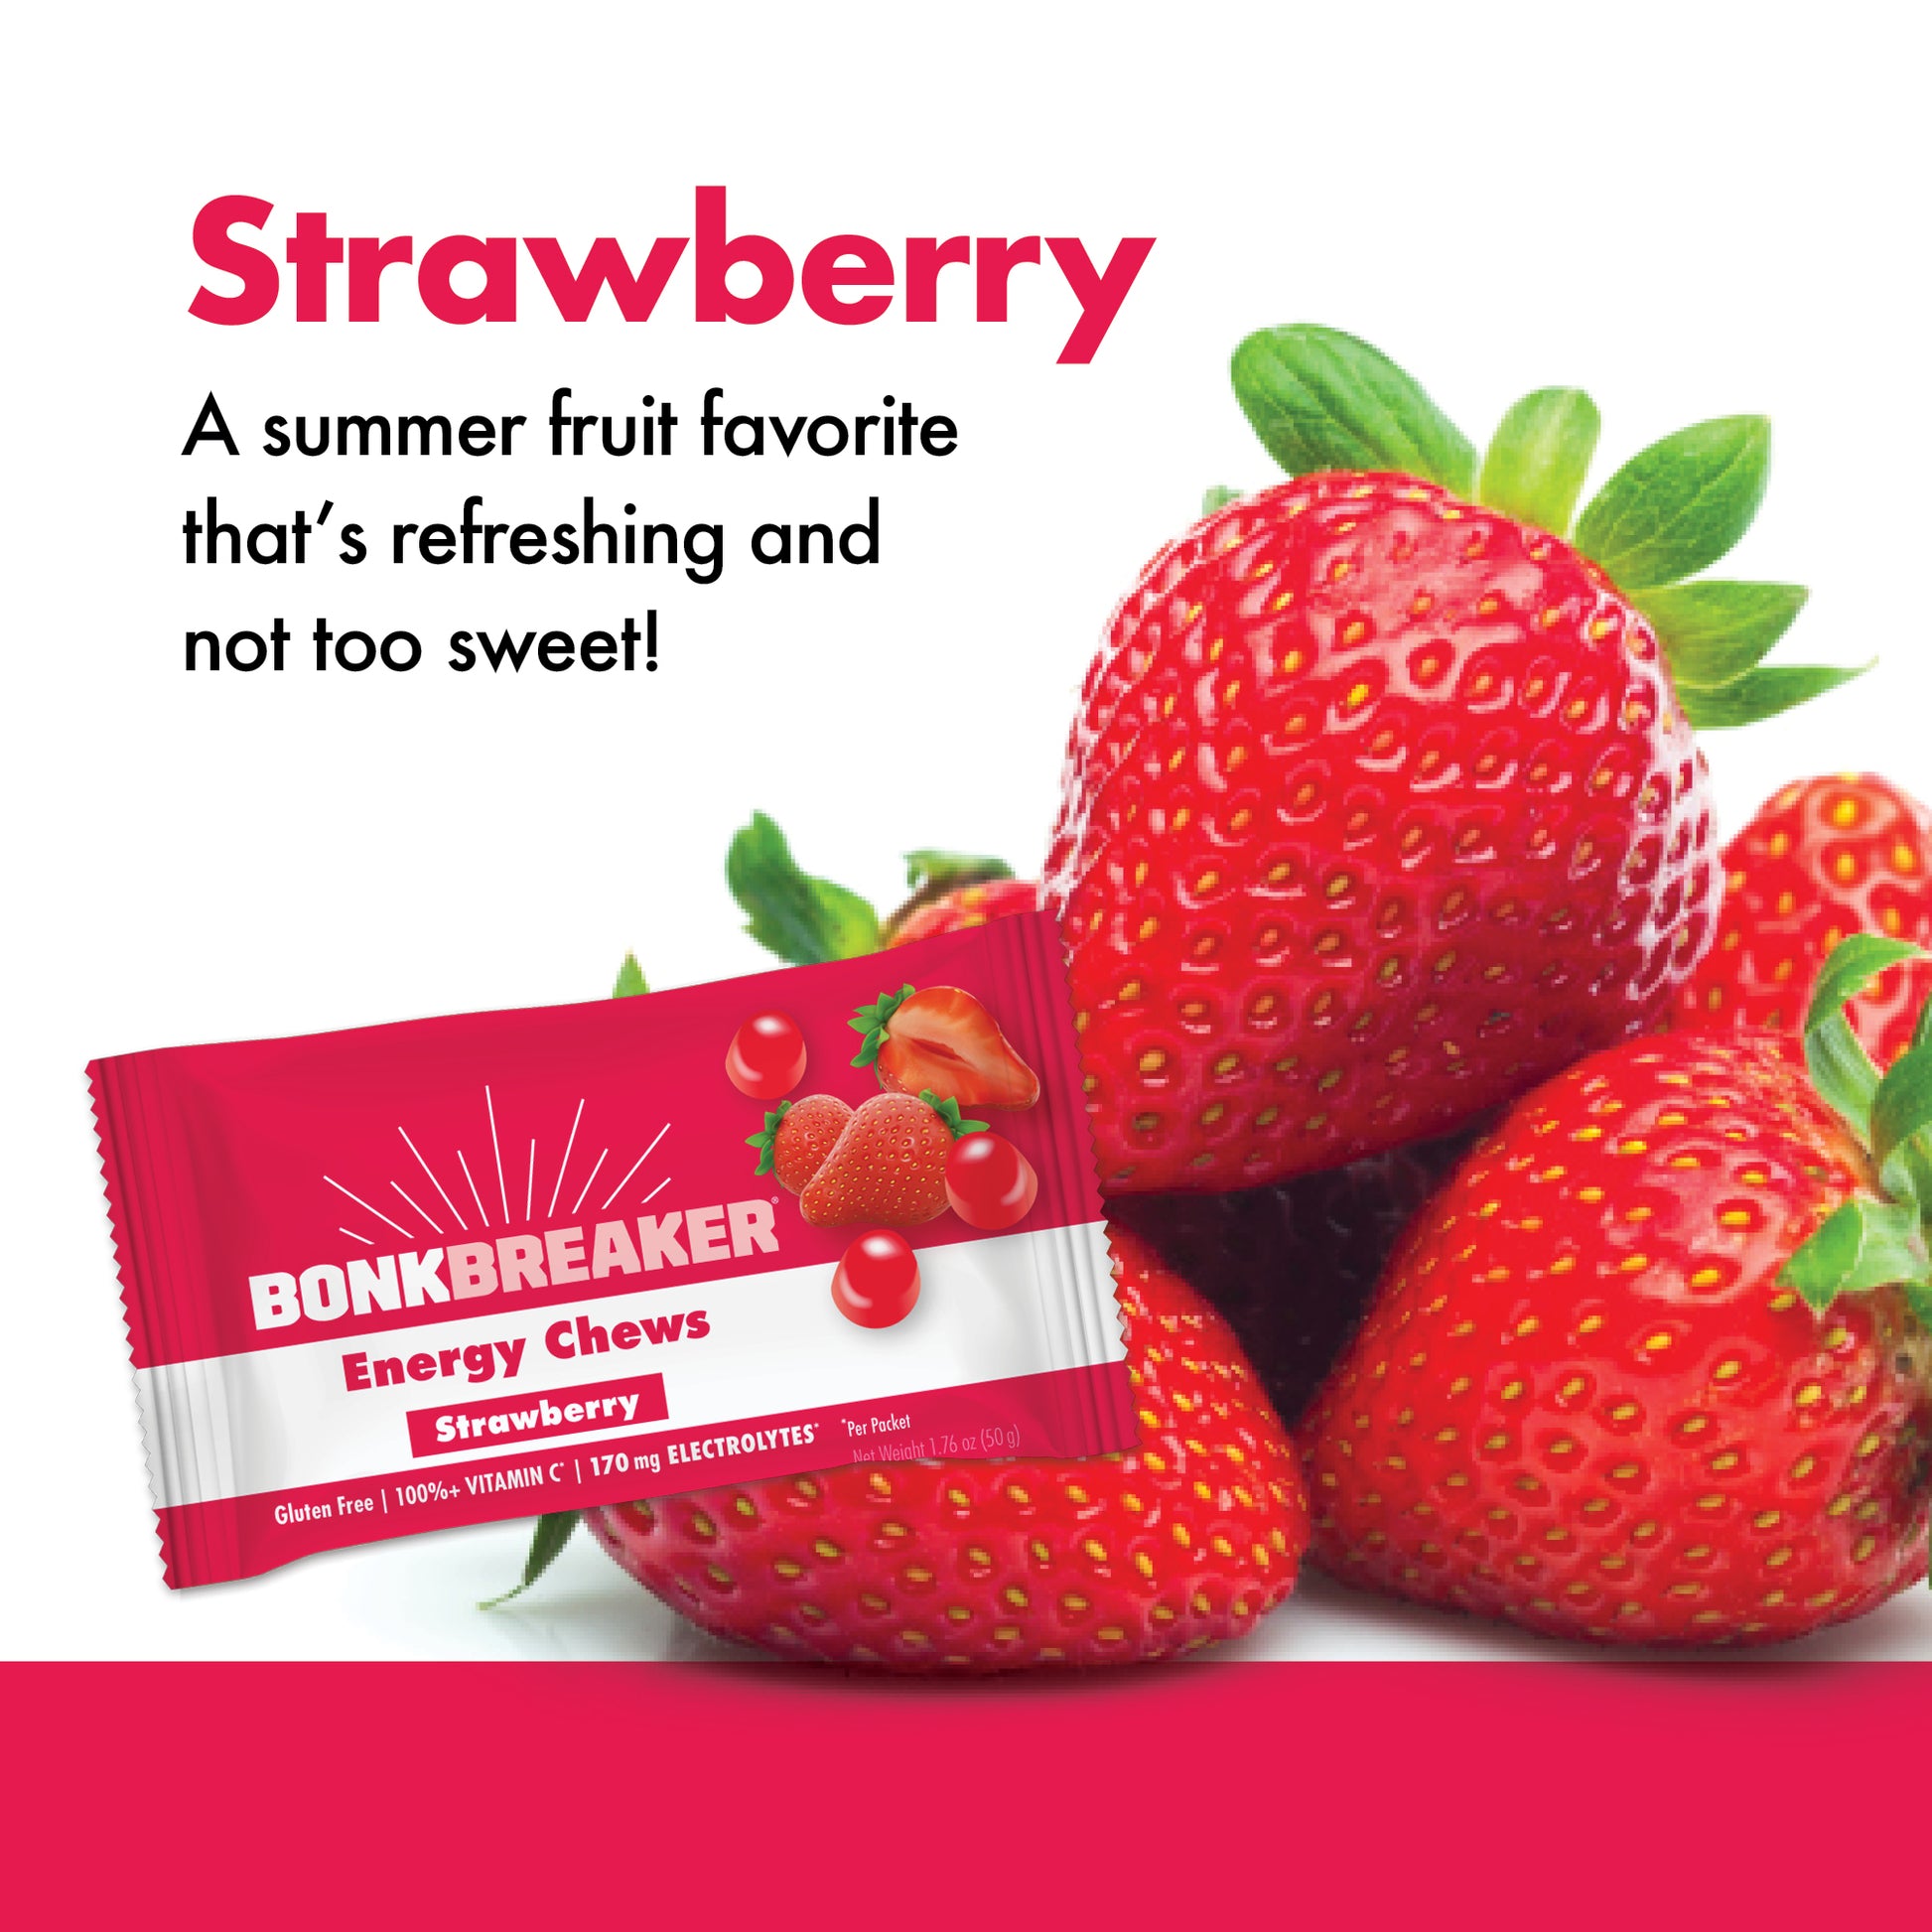 Strawberry - A summer fruit favorite that's refreshing and not too sweet!